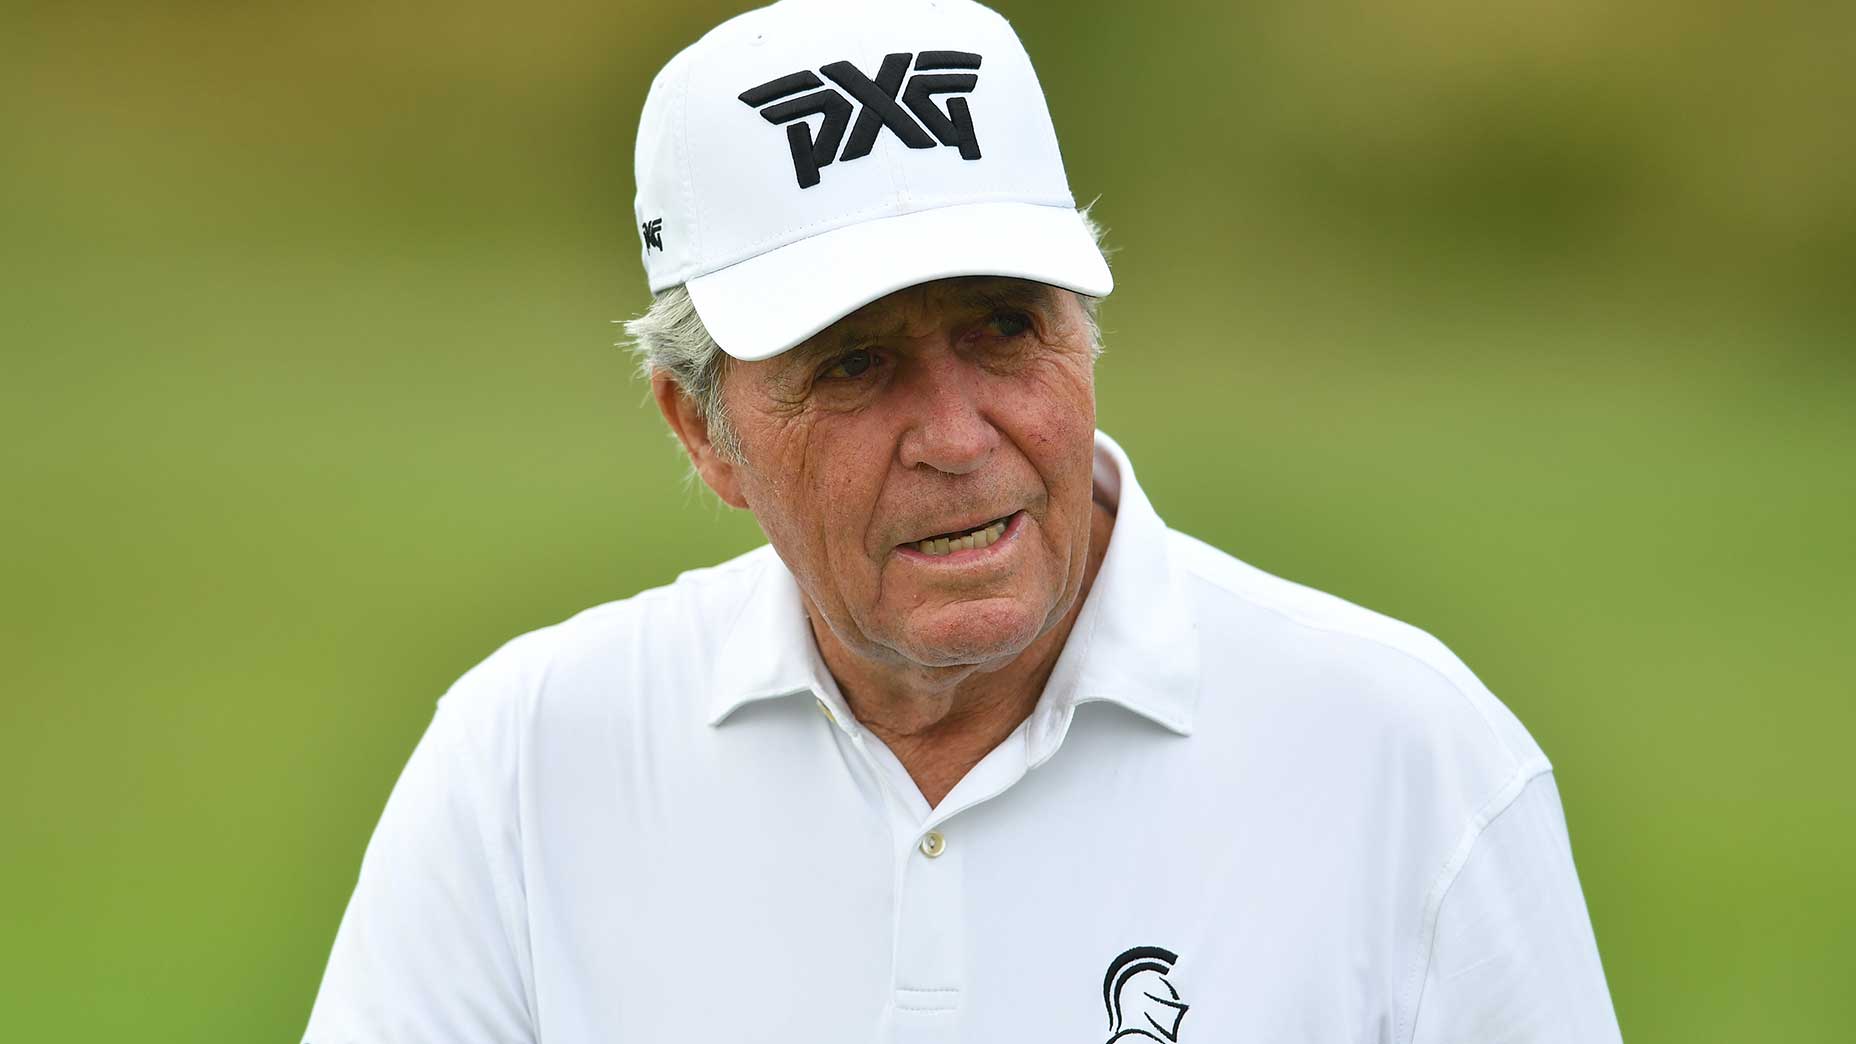 Gary Player looks on during a golf tournament